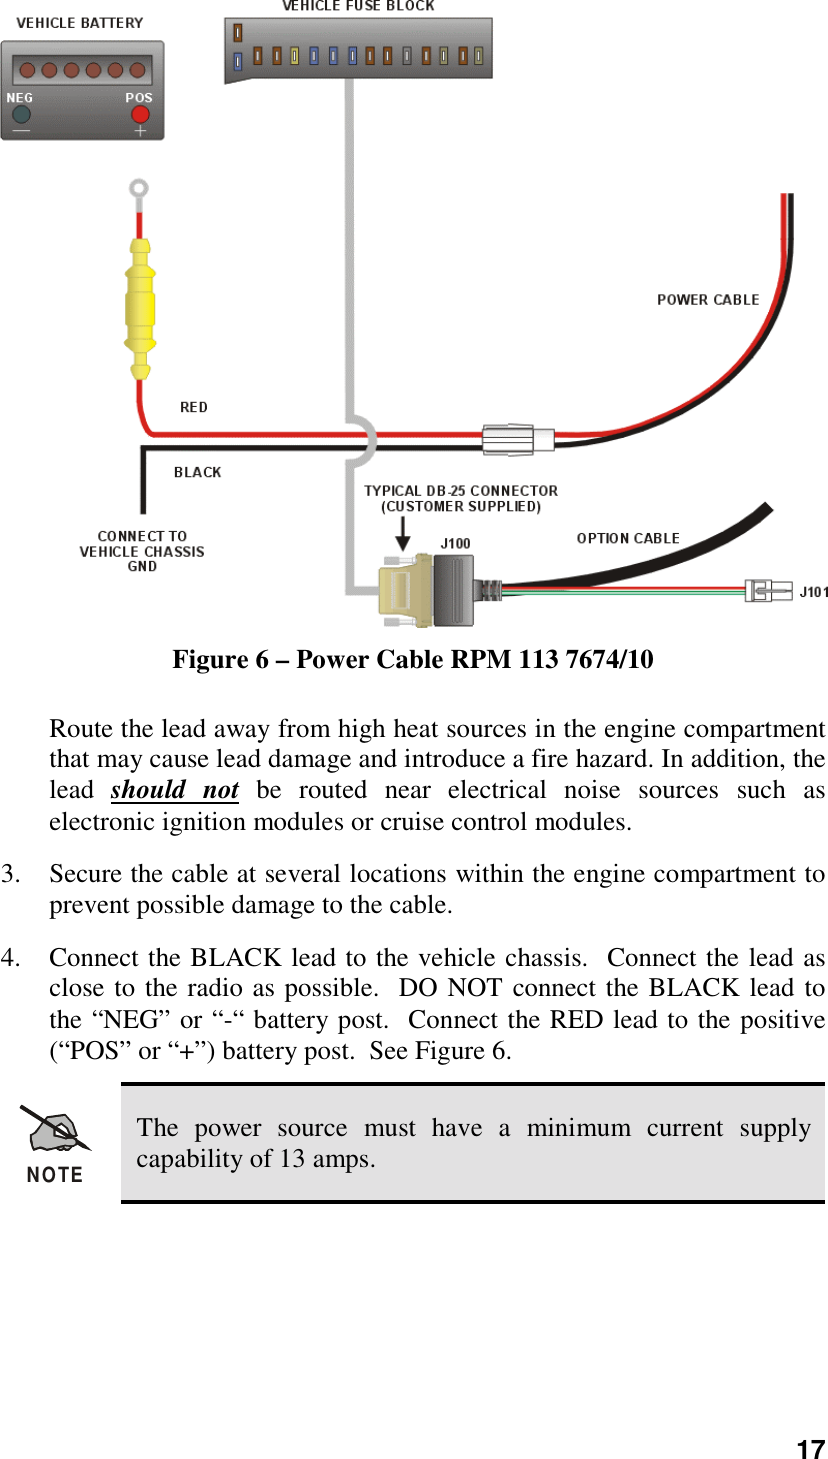 17Figure 6 – Power Cable RPM 113 7674/10Route the lead away from high heat sources in the engine compartmentthat may cause lead damage and introduce a fire hazard. In addition, thelead  should not be routed near electrical noise sources such aselectronic ignition modules or cruise control modules.3. Secure the cable at several locations within the engine compartment toprevent possible damage to the cable.4. Connect the BLACK lead to the vehicle chassis.  Connect the lead asclose to the radio as possible.  DO NOT connect the BLACK lead tothe “NEG” or “-“ battery post.  Connect the RED lead to the positive(“POS” or “+”) battery post.  See Figure 6.NOTEThe power source must have a minimum current supplycapability of 13 amps.